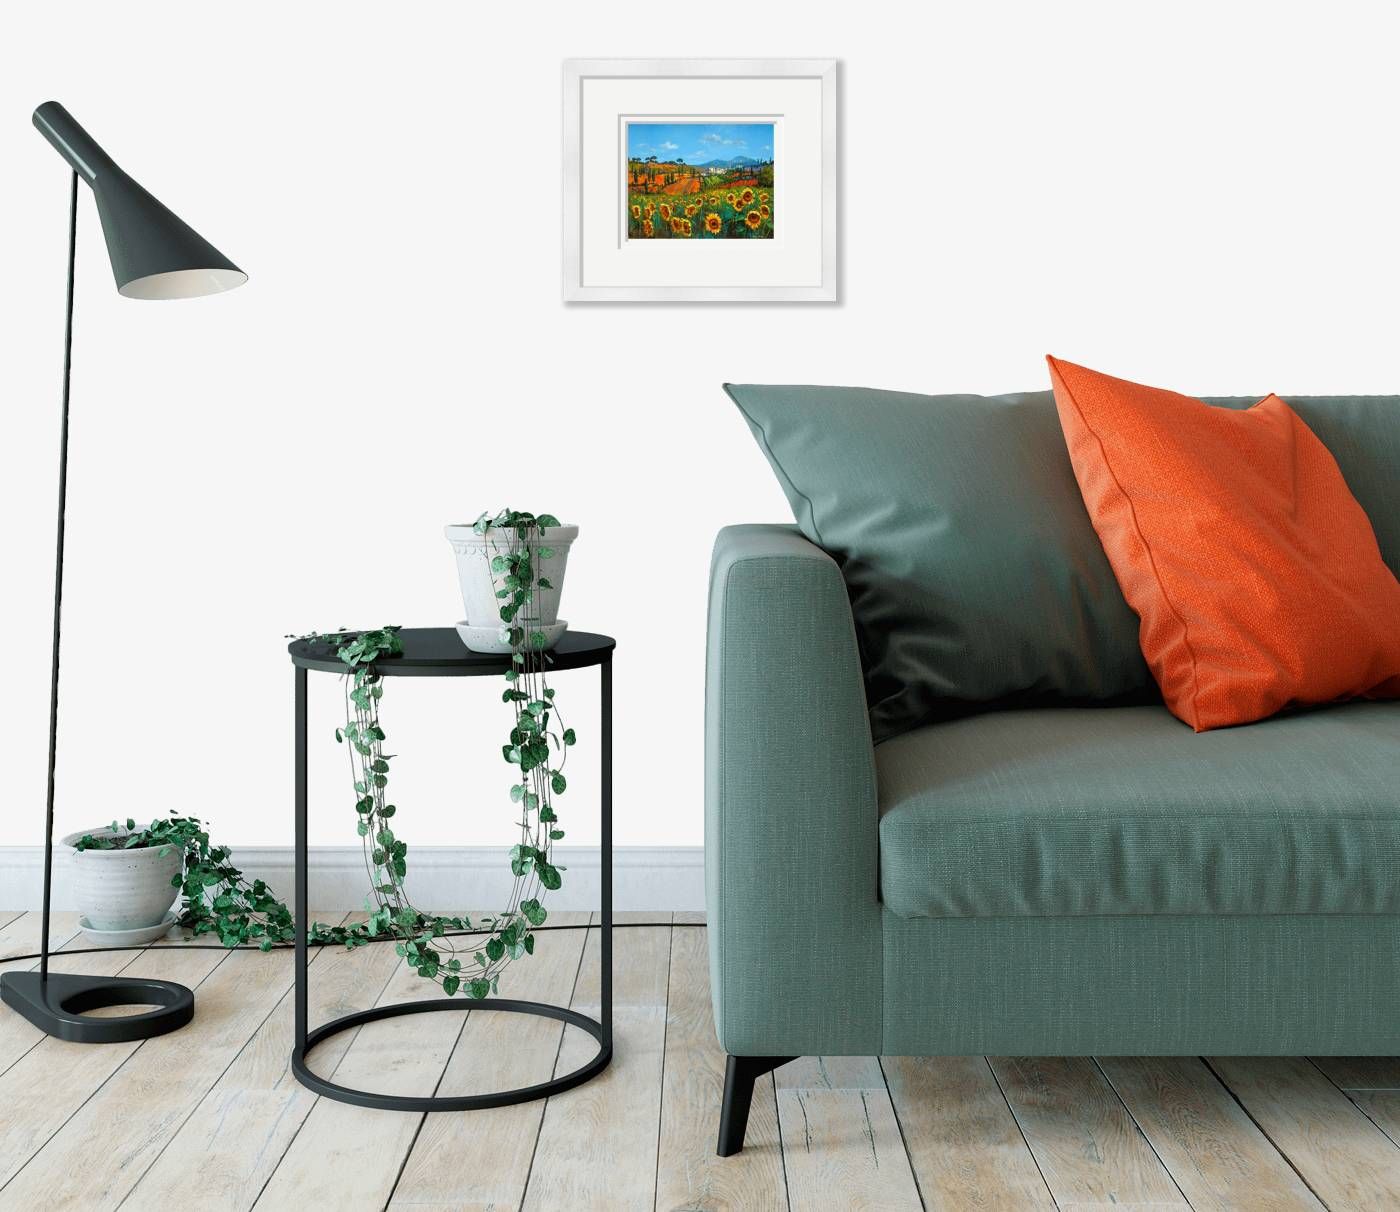 Small framed - Tuscan Sunflowers - 349 by Chris McMorrow